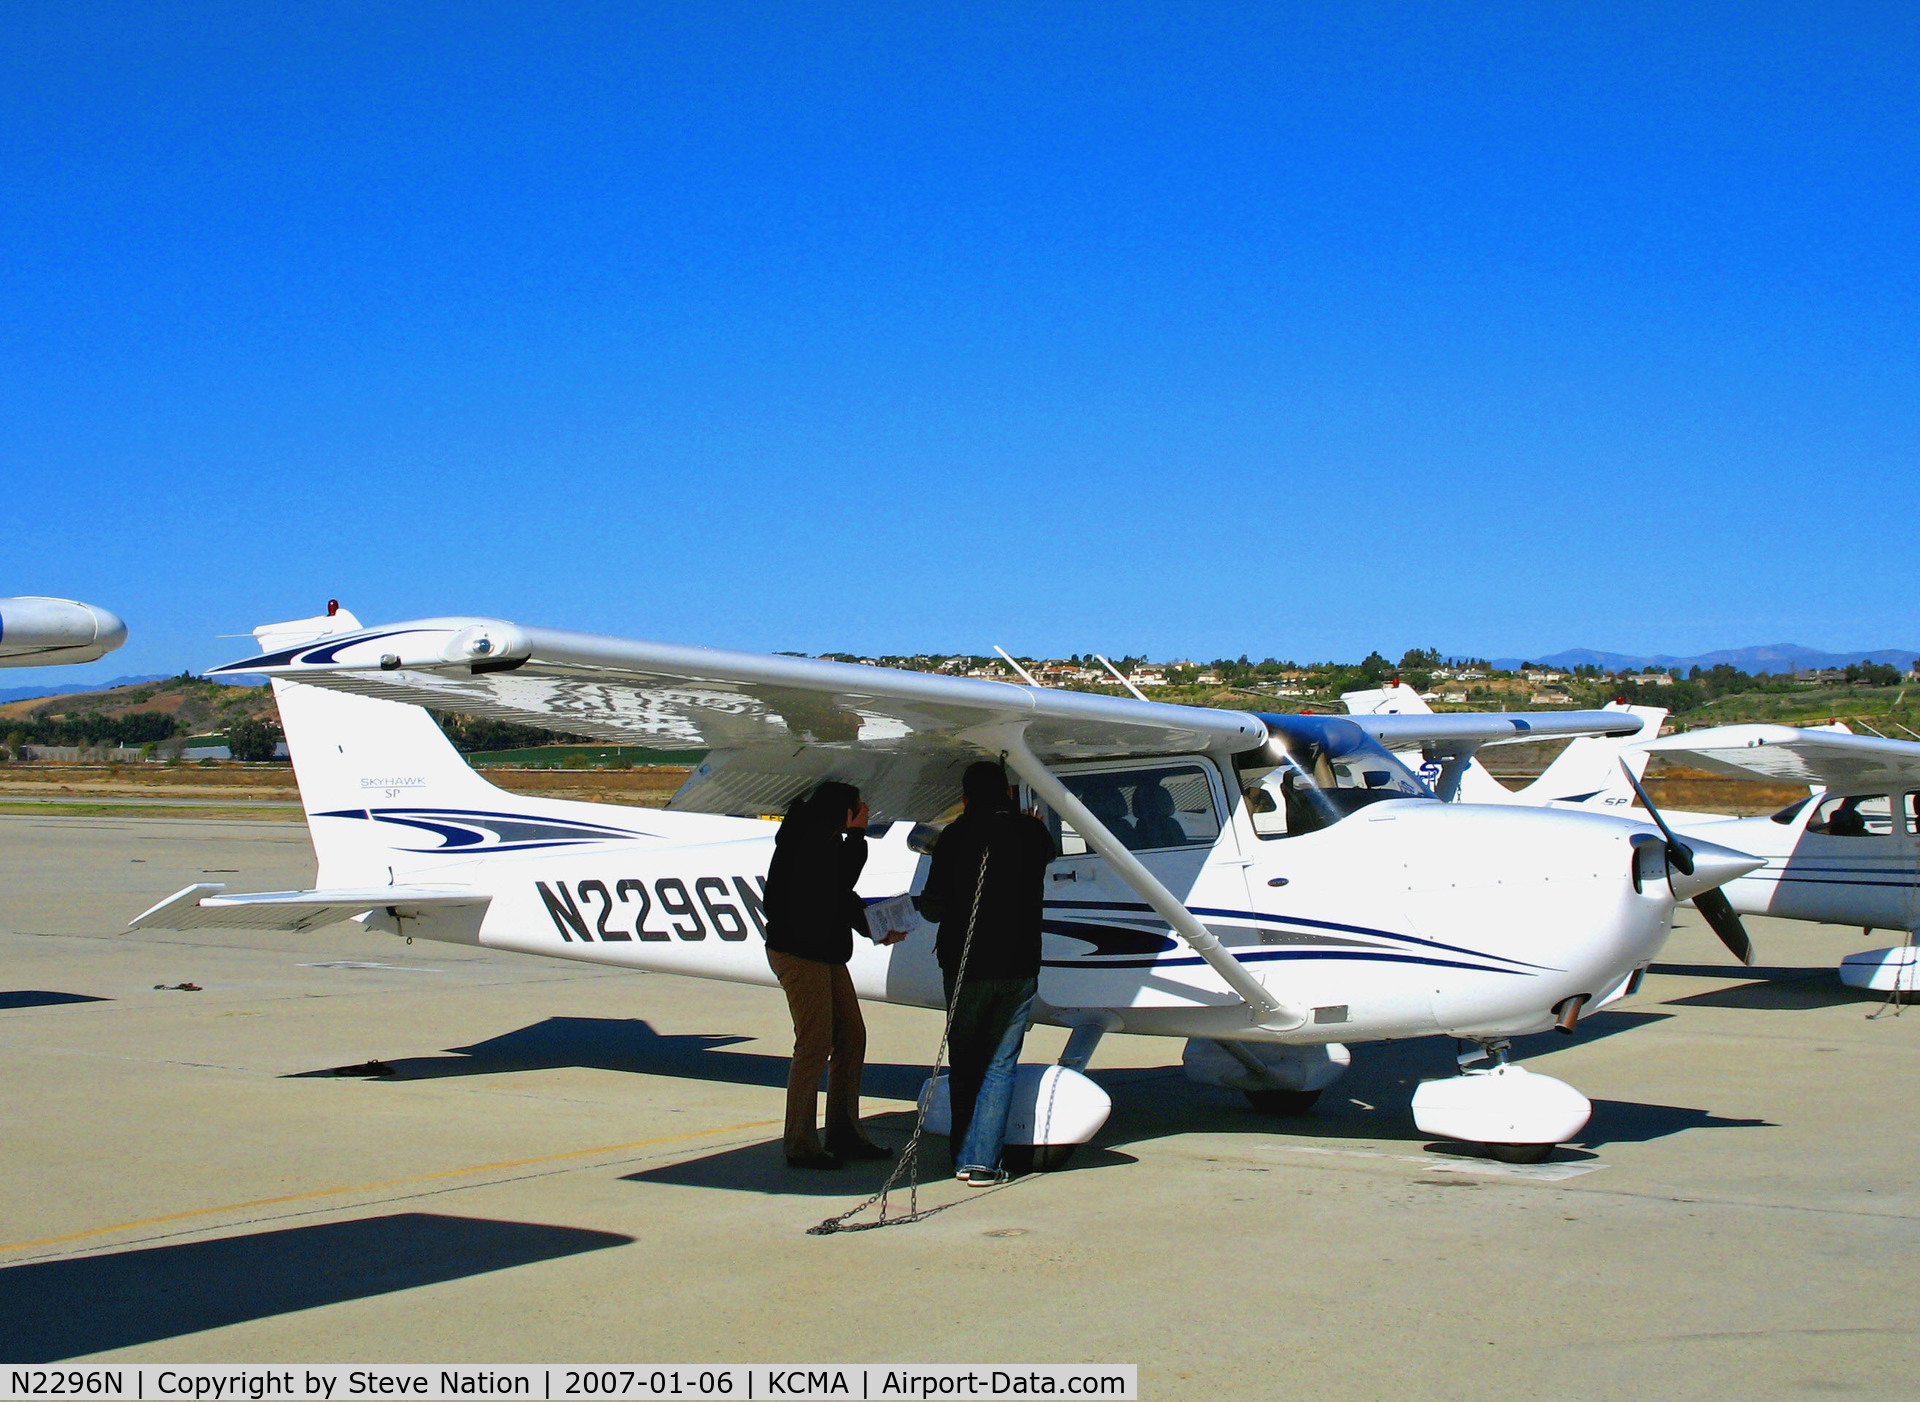 N2296N, 2005 Cessna 172S C/N 172S9967, 2005 Cessna 172S at Camarillo Airport, CA home base on balmy, sunny January 2007 picture postcard day